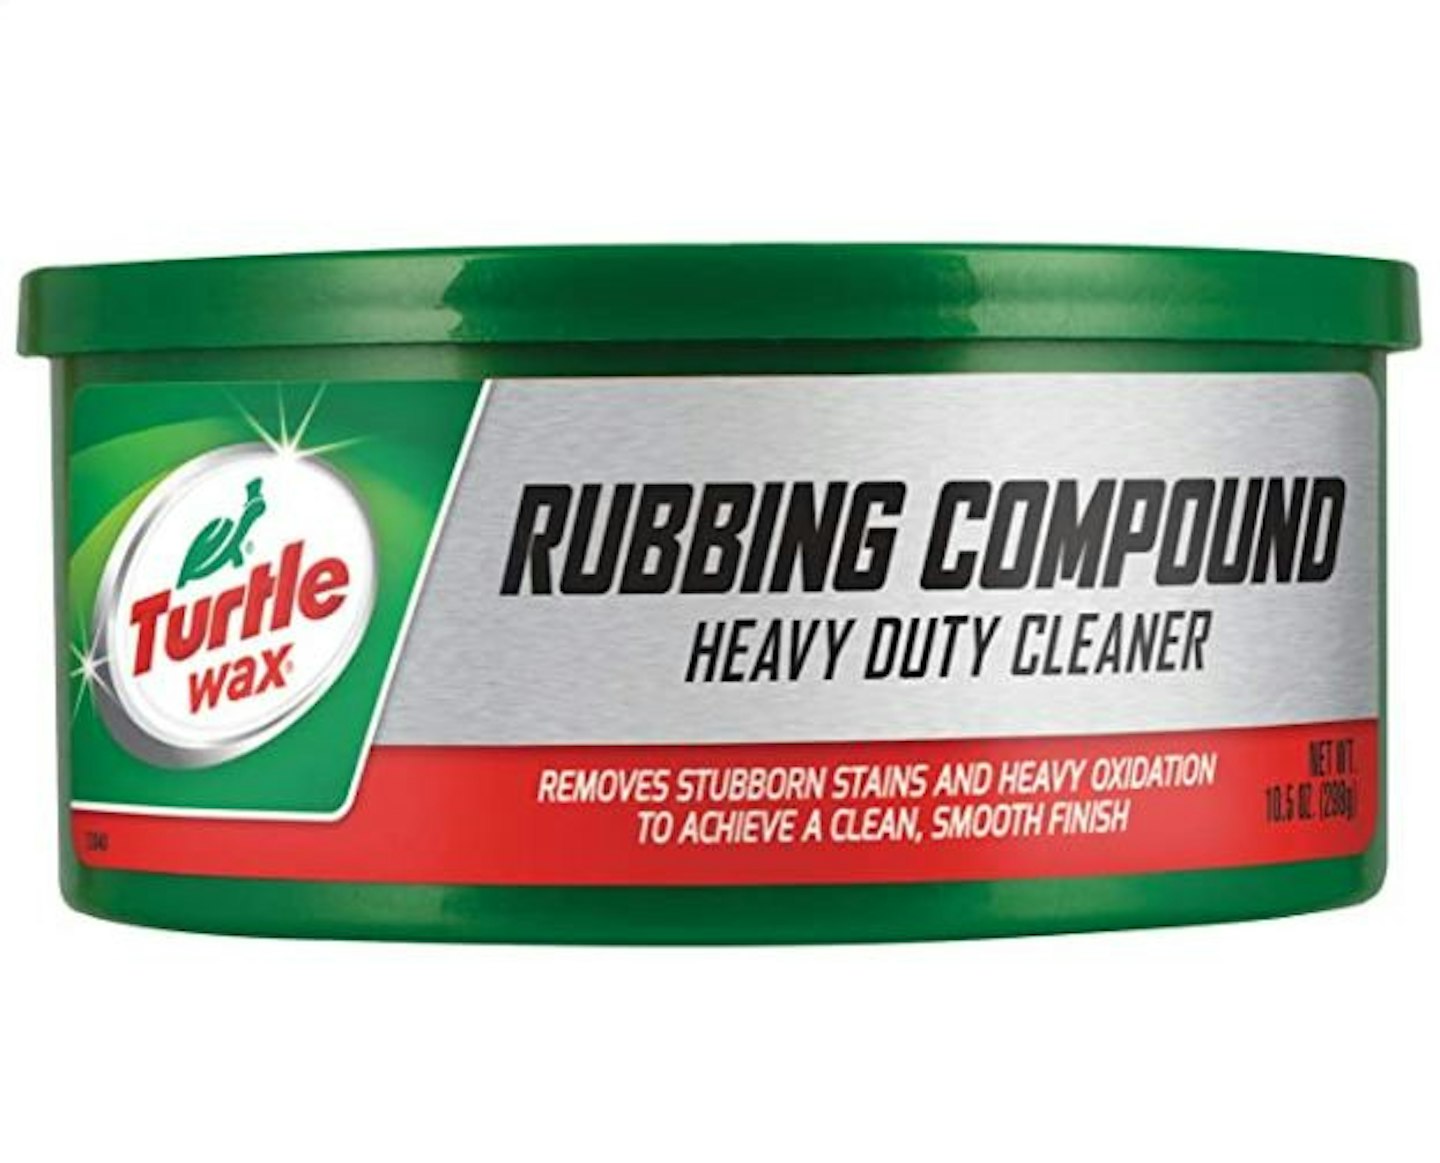 Turtle Wax Rubbing Compound Heavy Duty Cleaner 298g